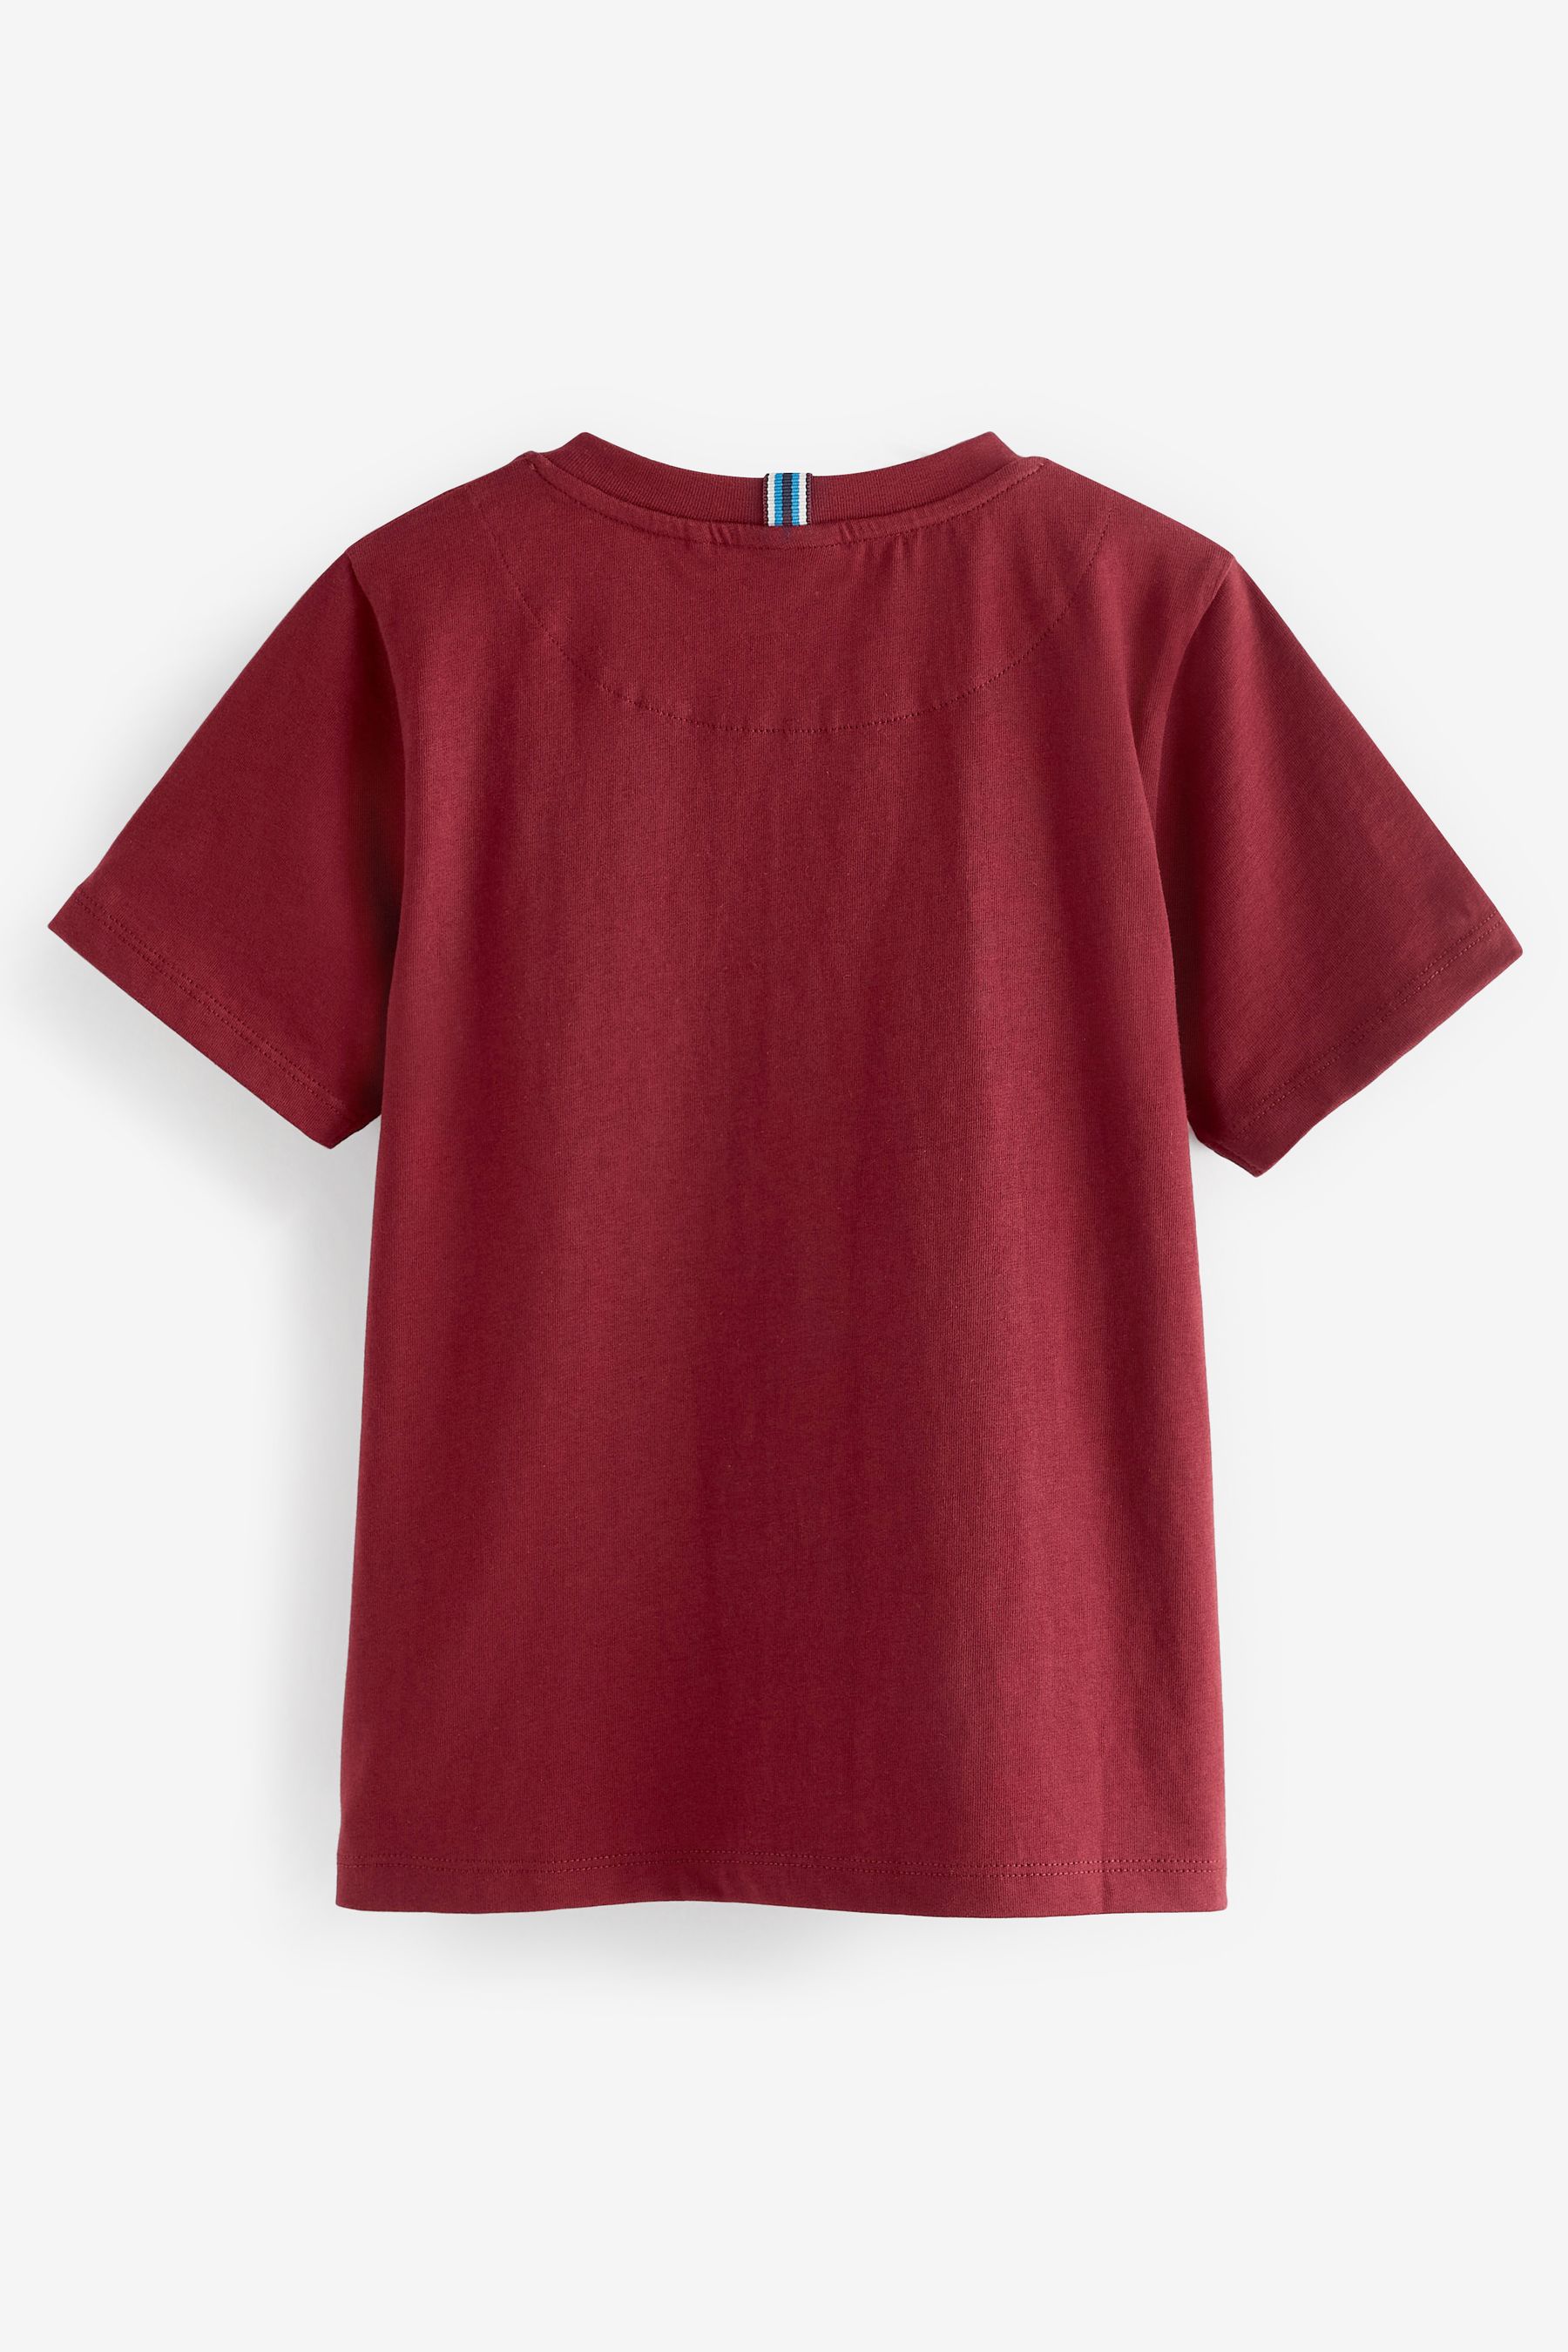 Buy Baker by Ted Baker T-Shirts 3 Packs from the Next UK online shop